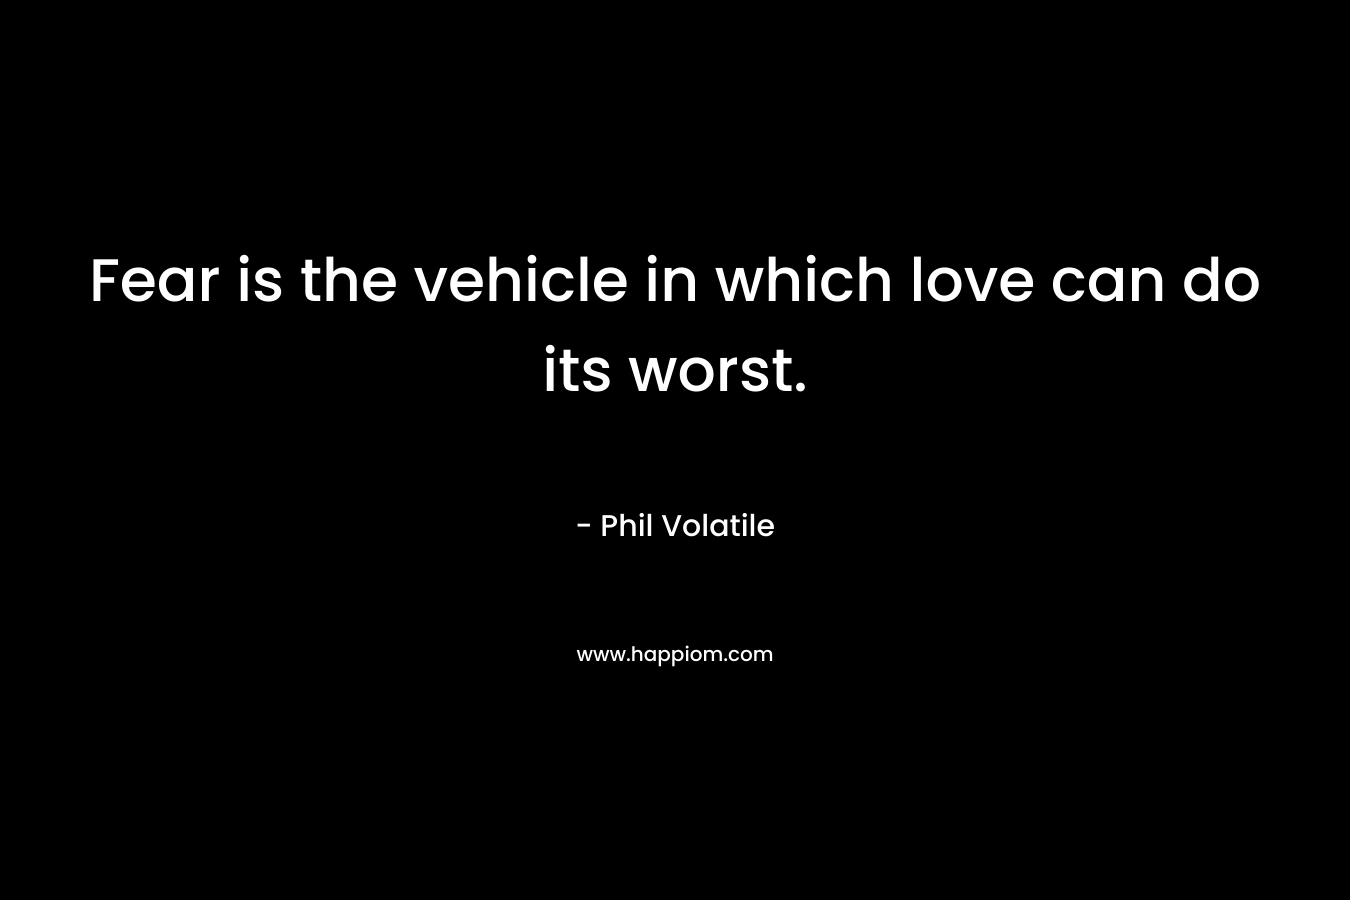 Fear is the vehicle in which love can do its worst.